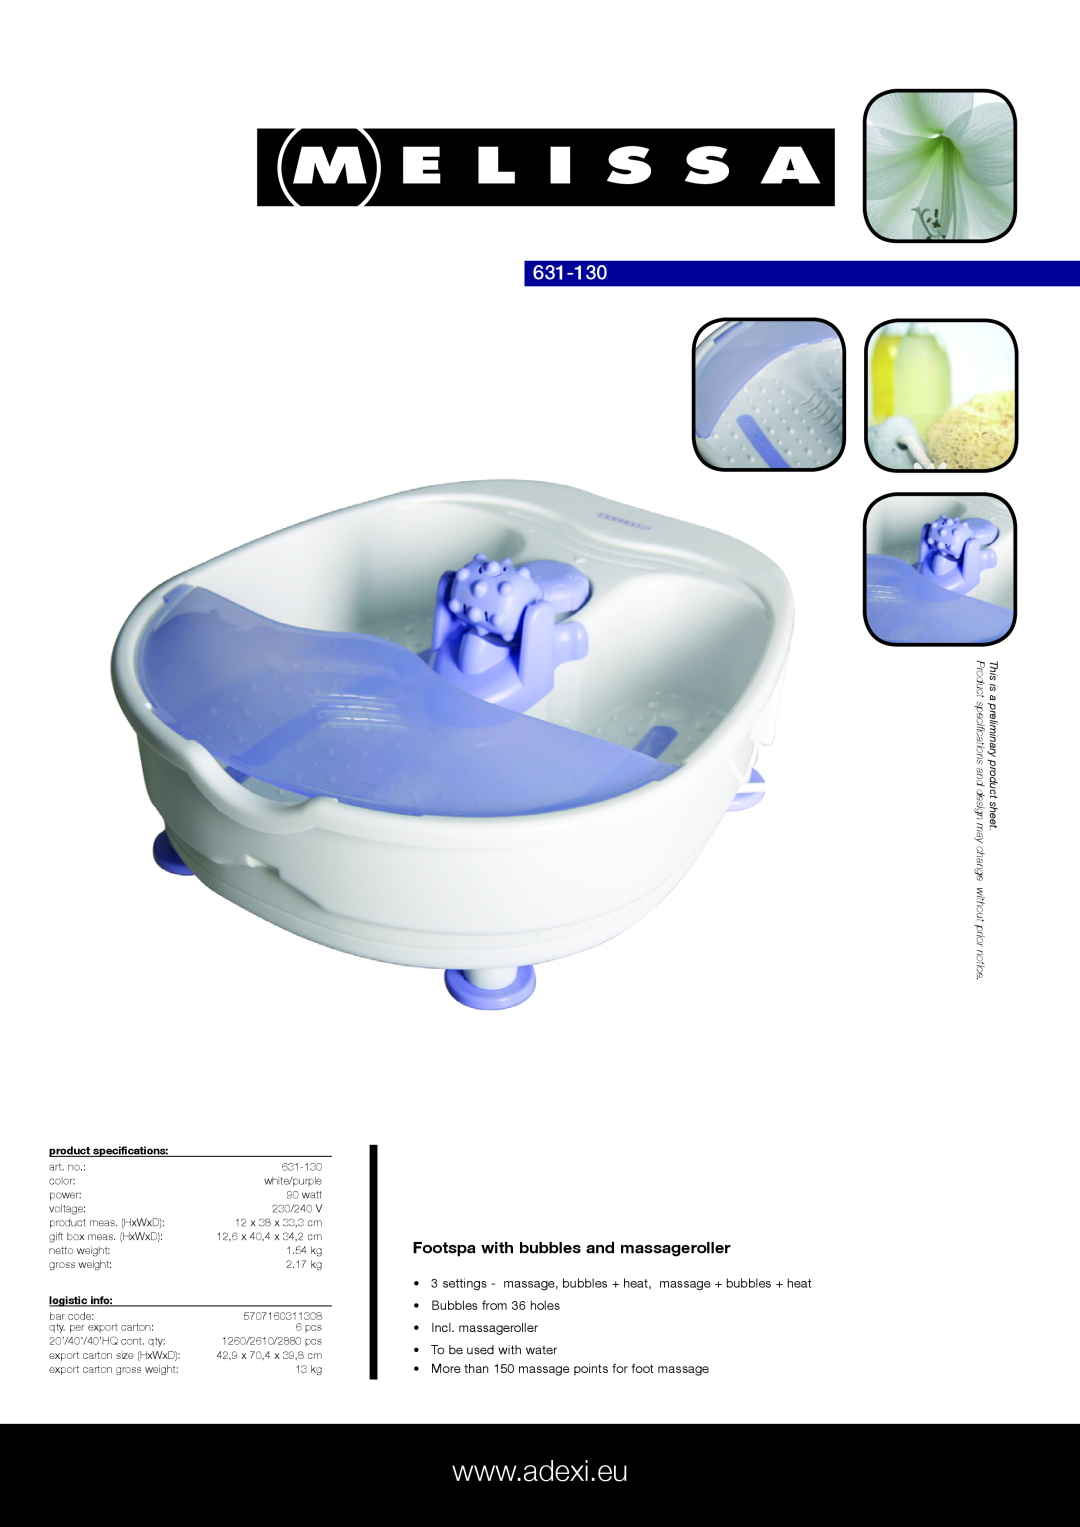 Melissa 631-130 specifications Footspa with bubbles and massageroller, More than 150 massage points for foot massage 